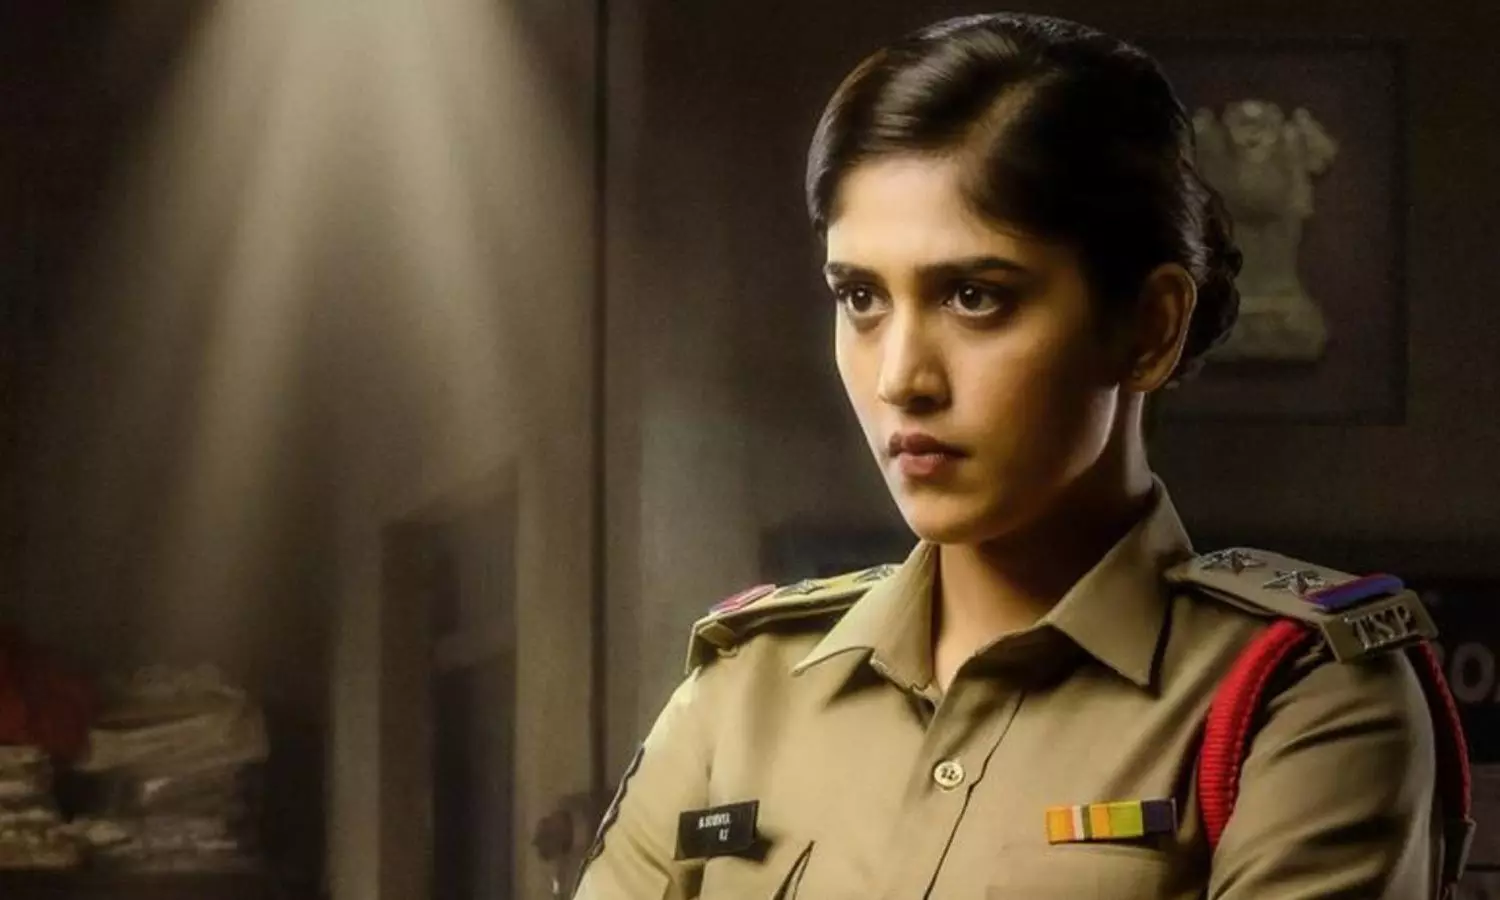 Chandni Chaudhary Takes on Powerful Cop Role in ‘Yevam’